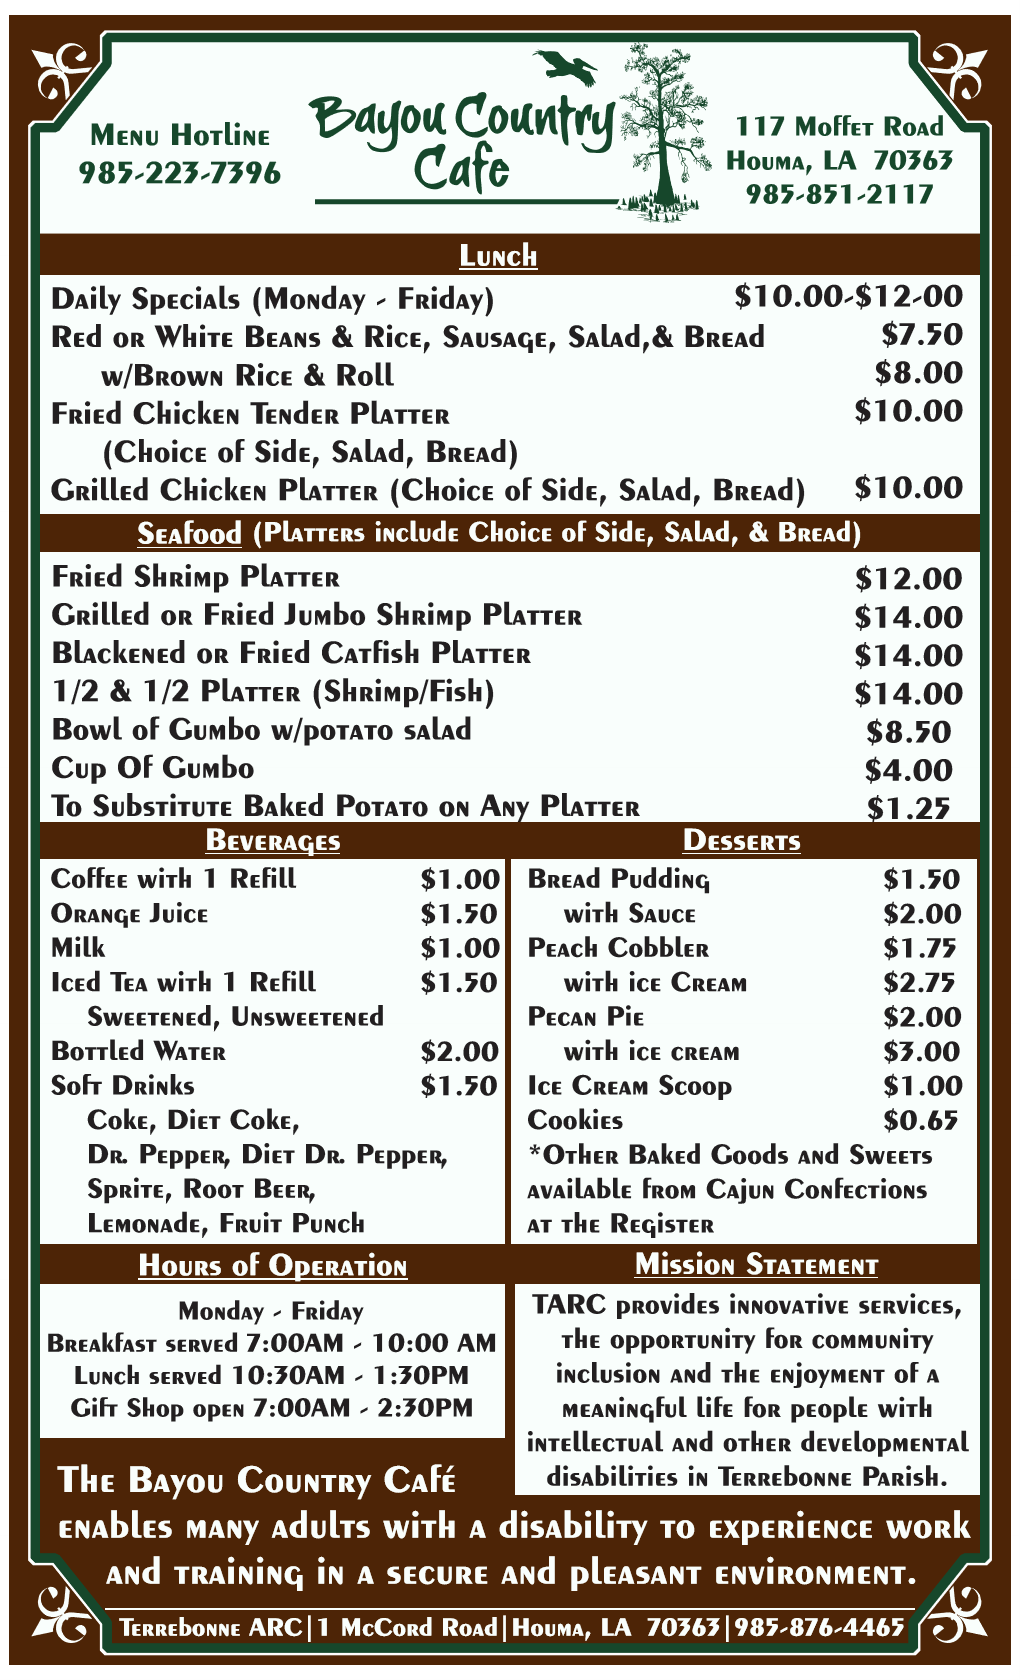 BCC Legal Size Menu 12 2021 NEW PRICES 2022010712 Page2 